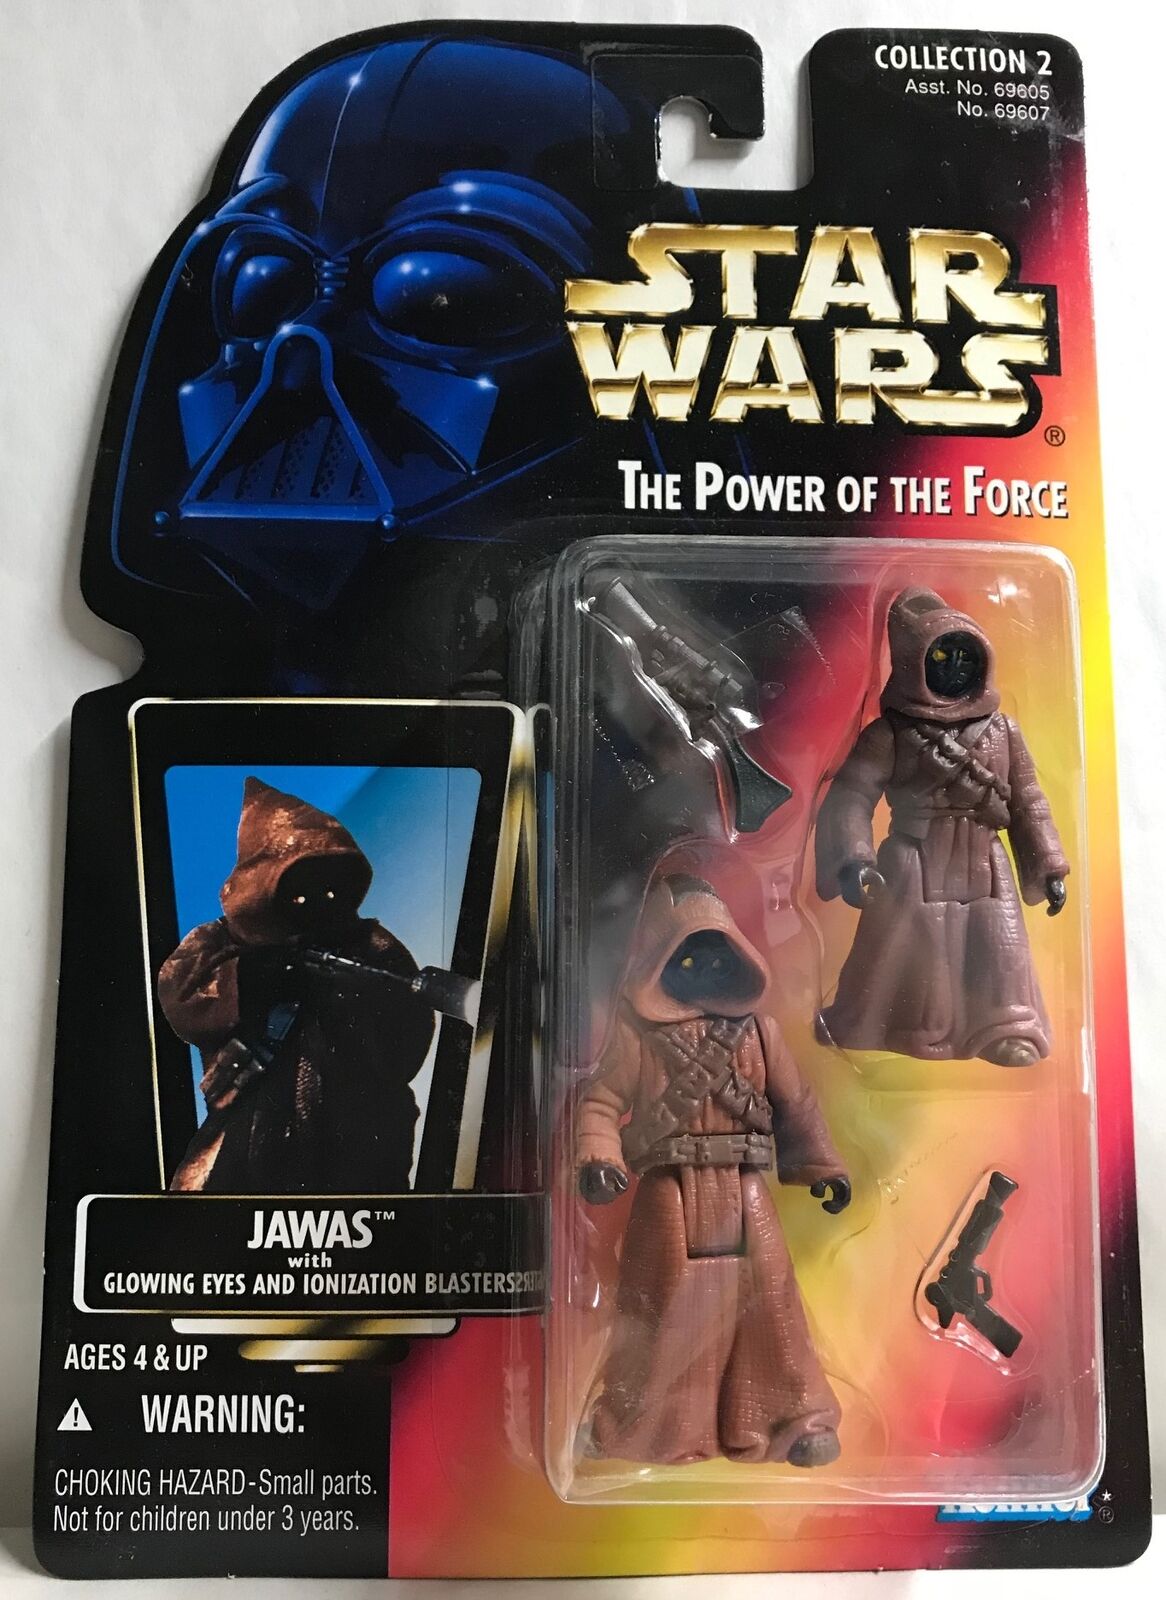 STAR WARS - KENNER - POTF - JAWAS - with Glowing Eyes and Ionization Blasters